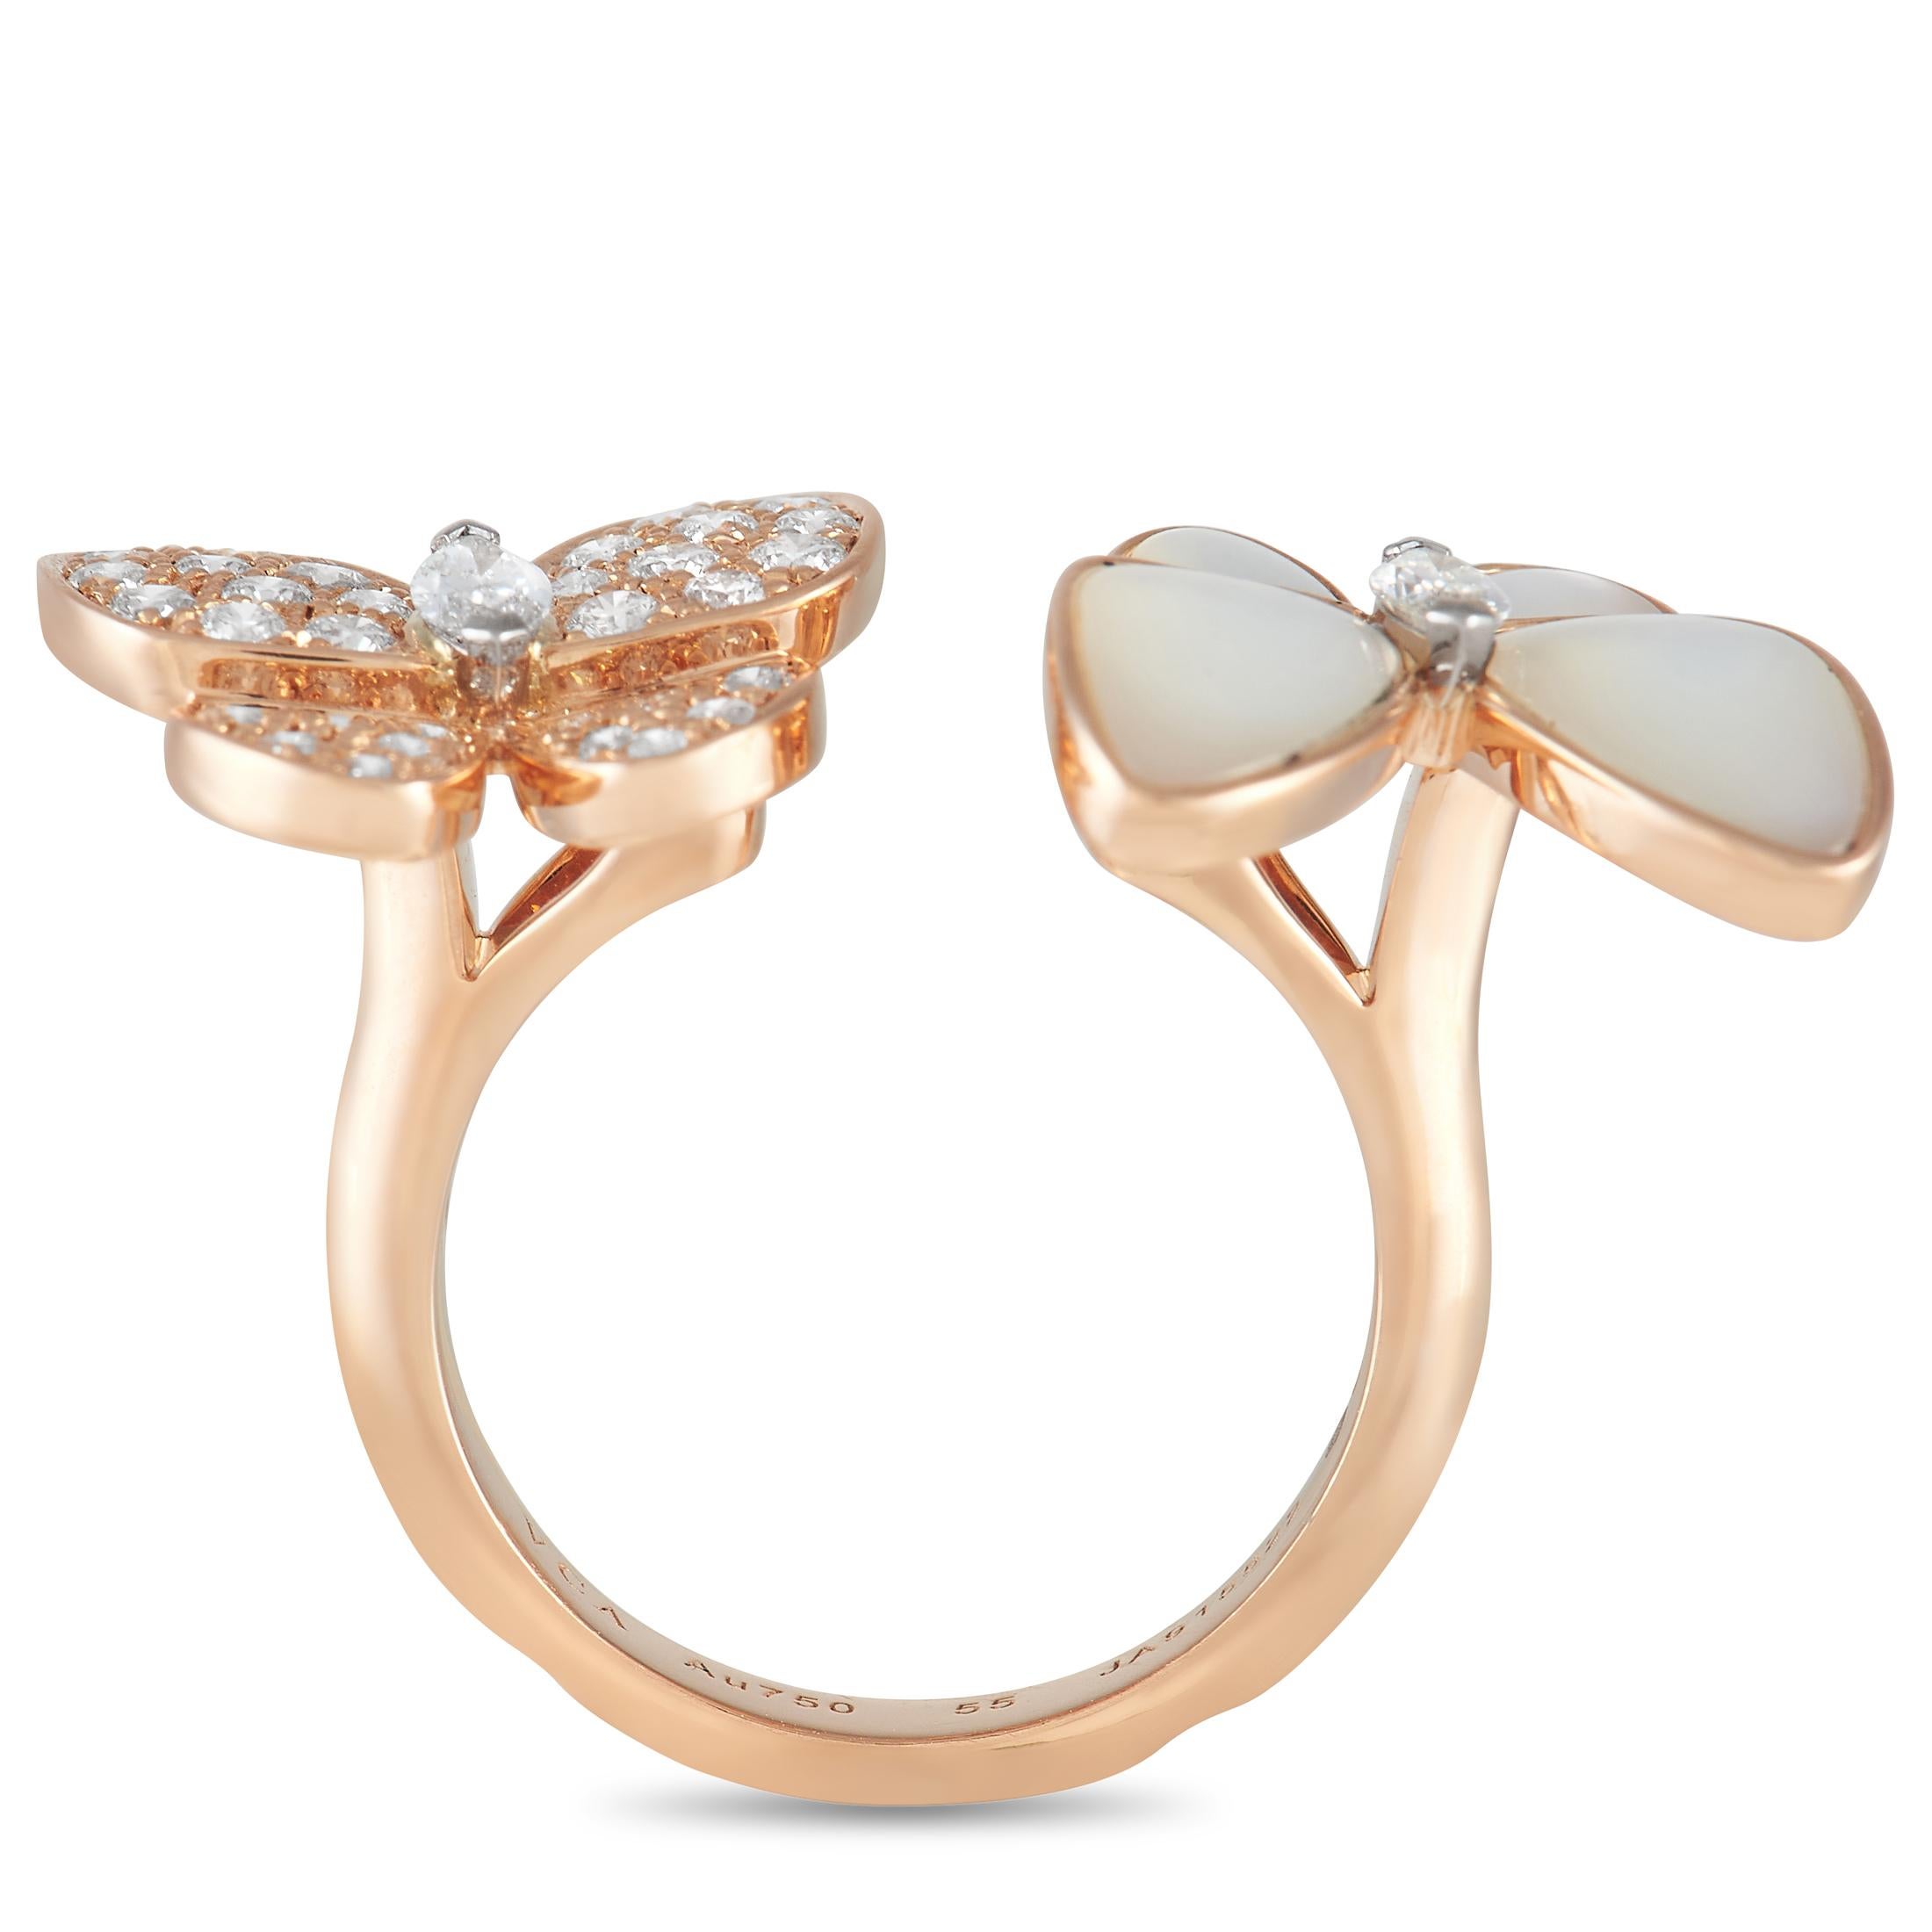 A stylish, asymmetrical design gives this Van Cleef & Arpels butterfly ring a delightful sense of movement. Crafted to look like two butterflies in flight, this charming piece includes a unique between-the-finger design for added visual impact.